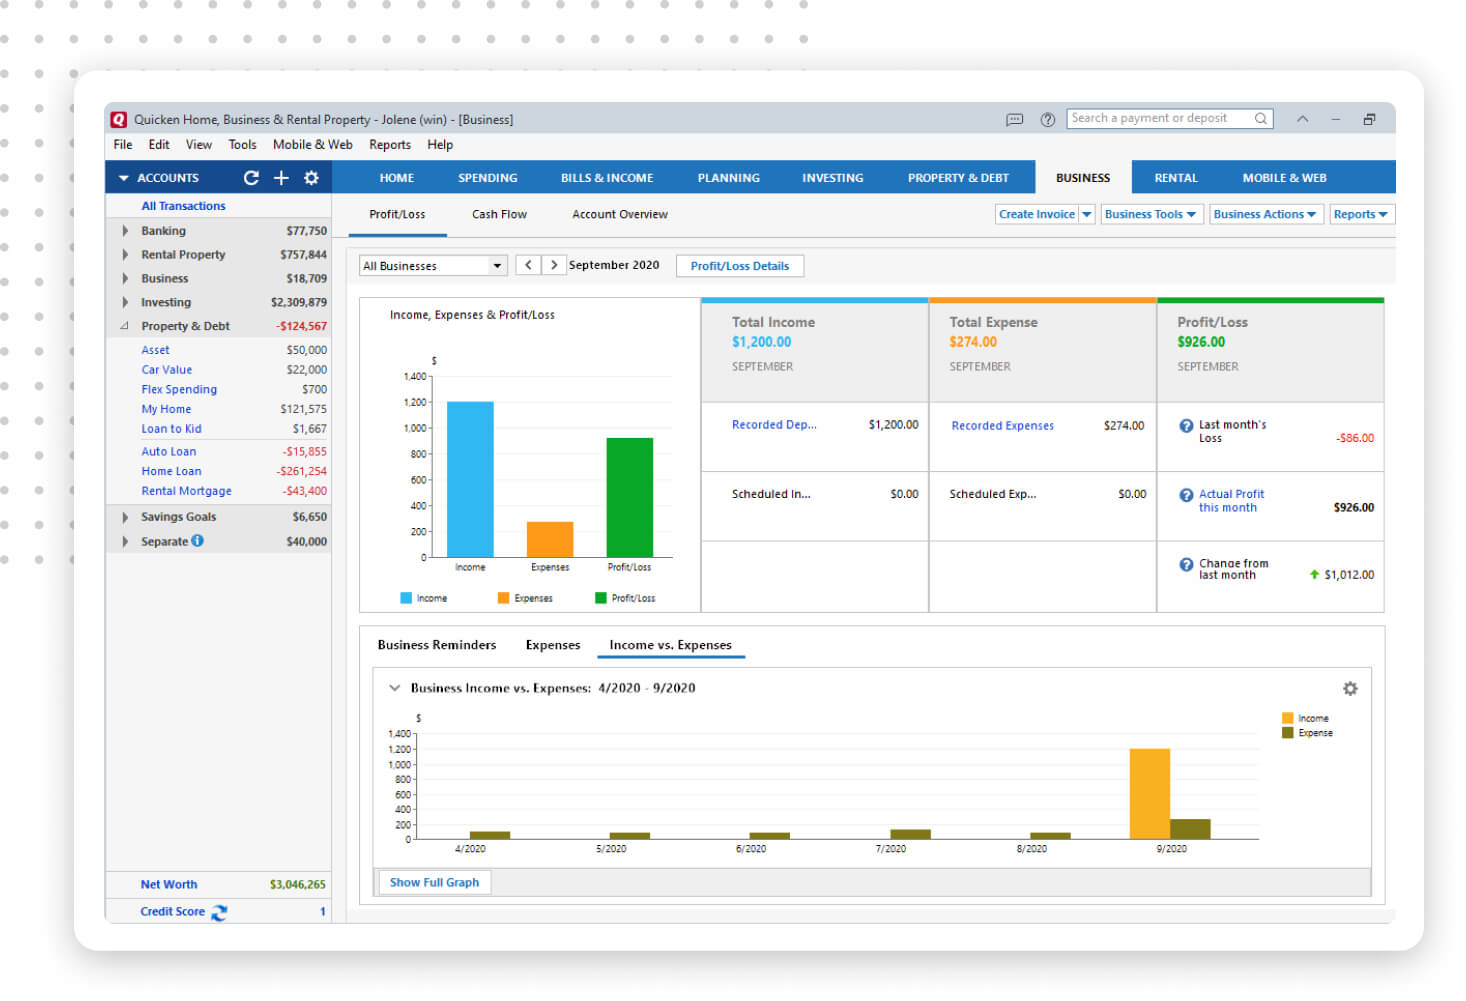 dashboard of your business finances